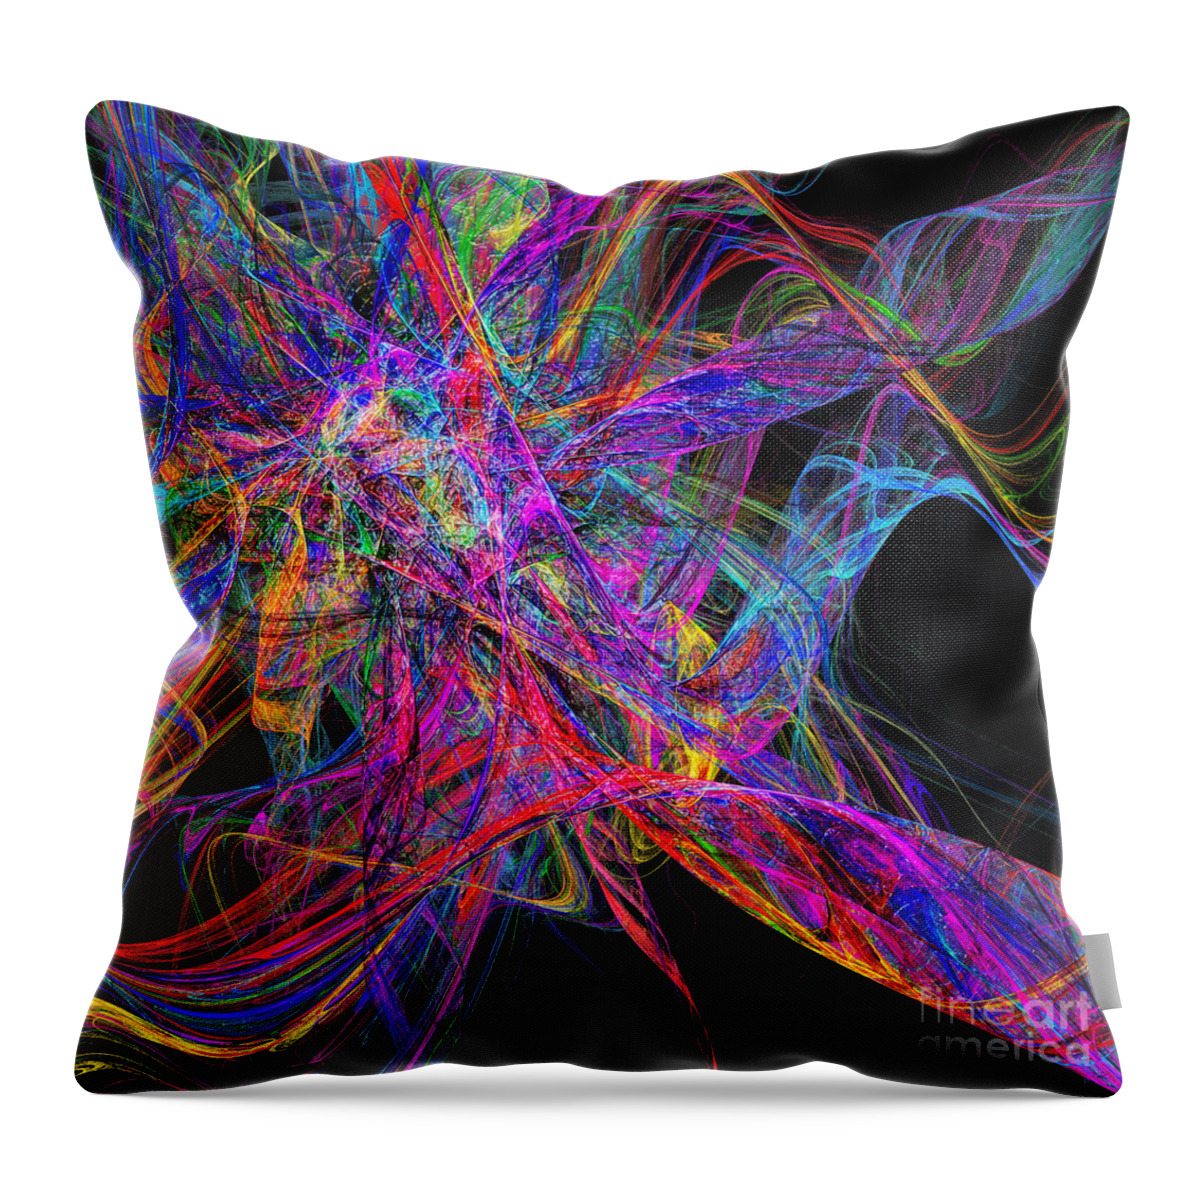 Andee Design Abstract Throw Pillow featuring the digital art Rainbow Colorful Chaos Abstract by Andee Design